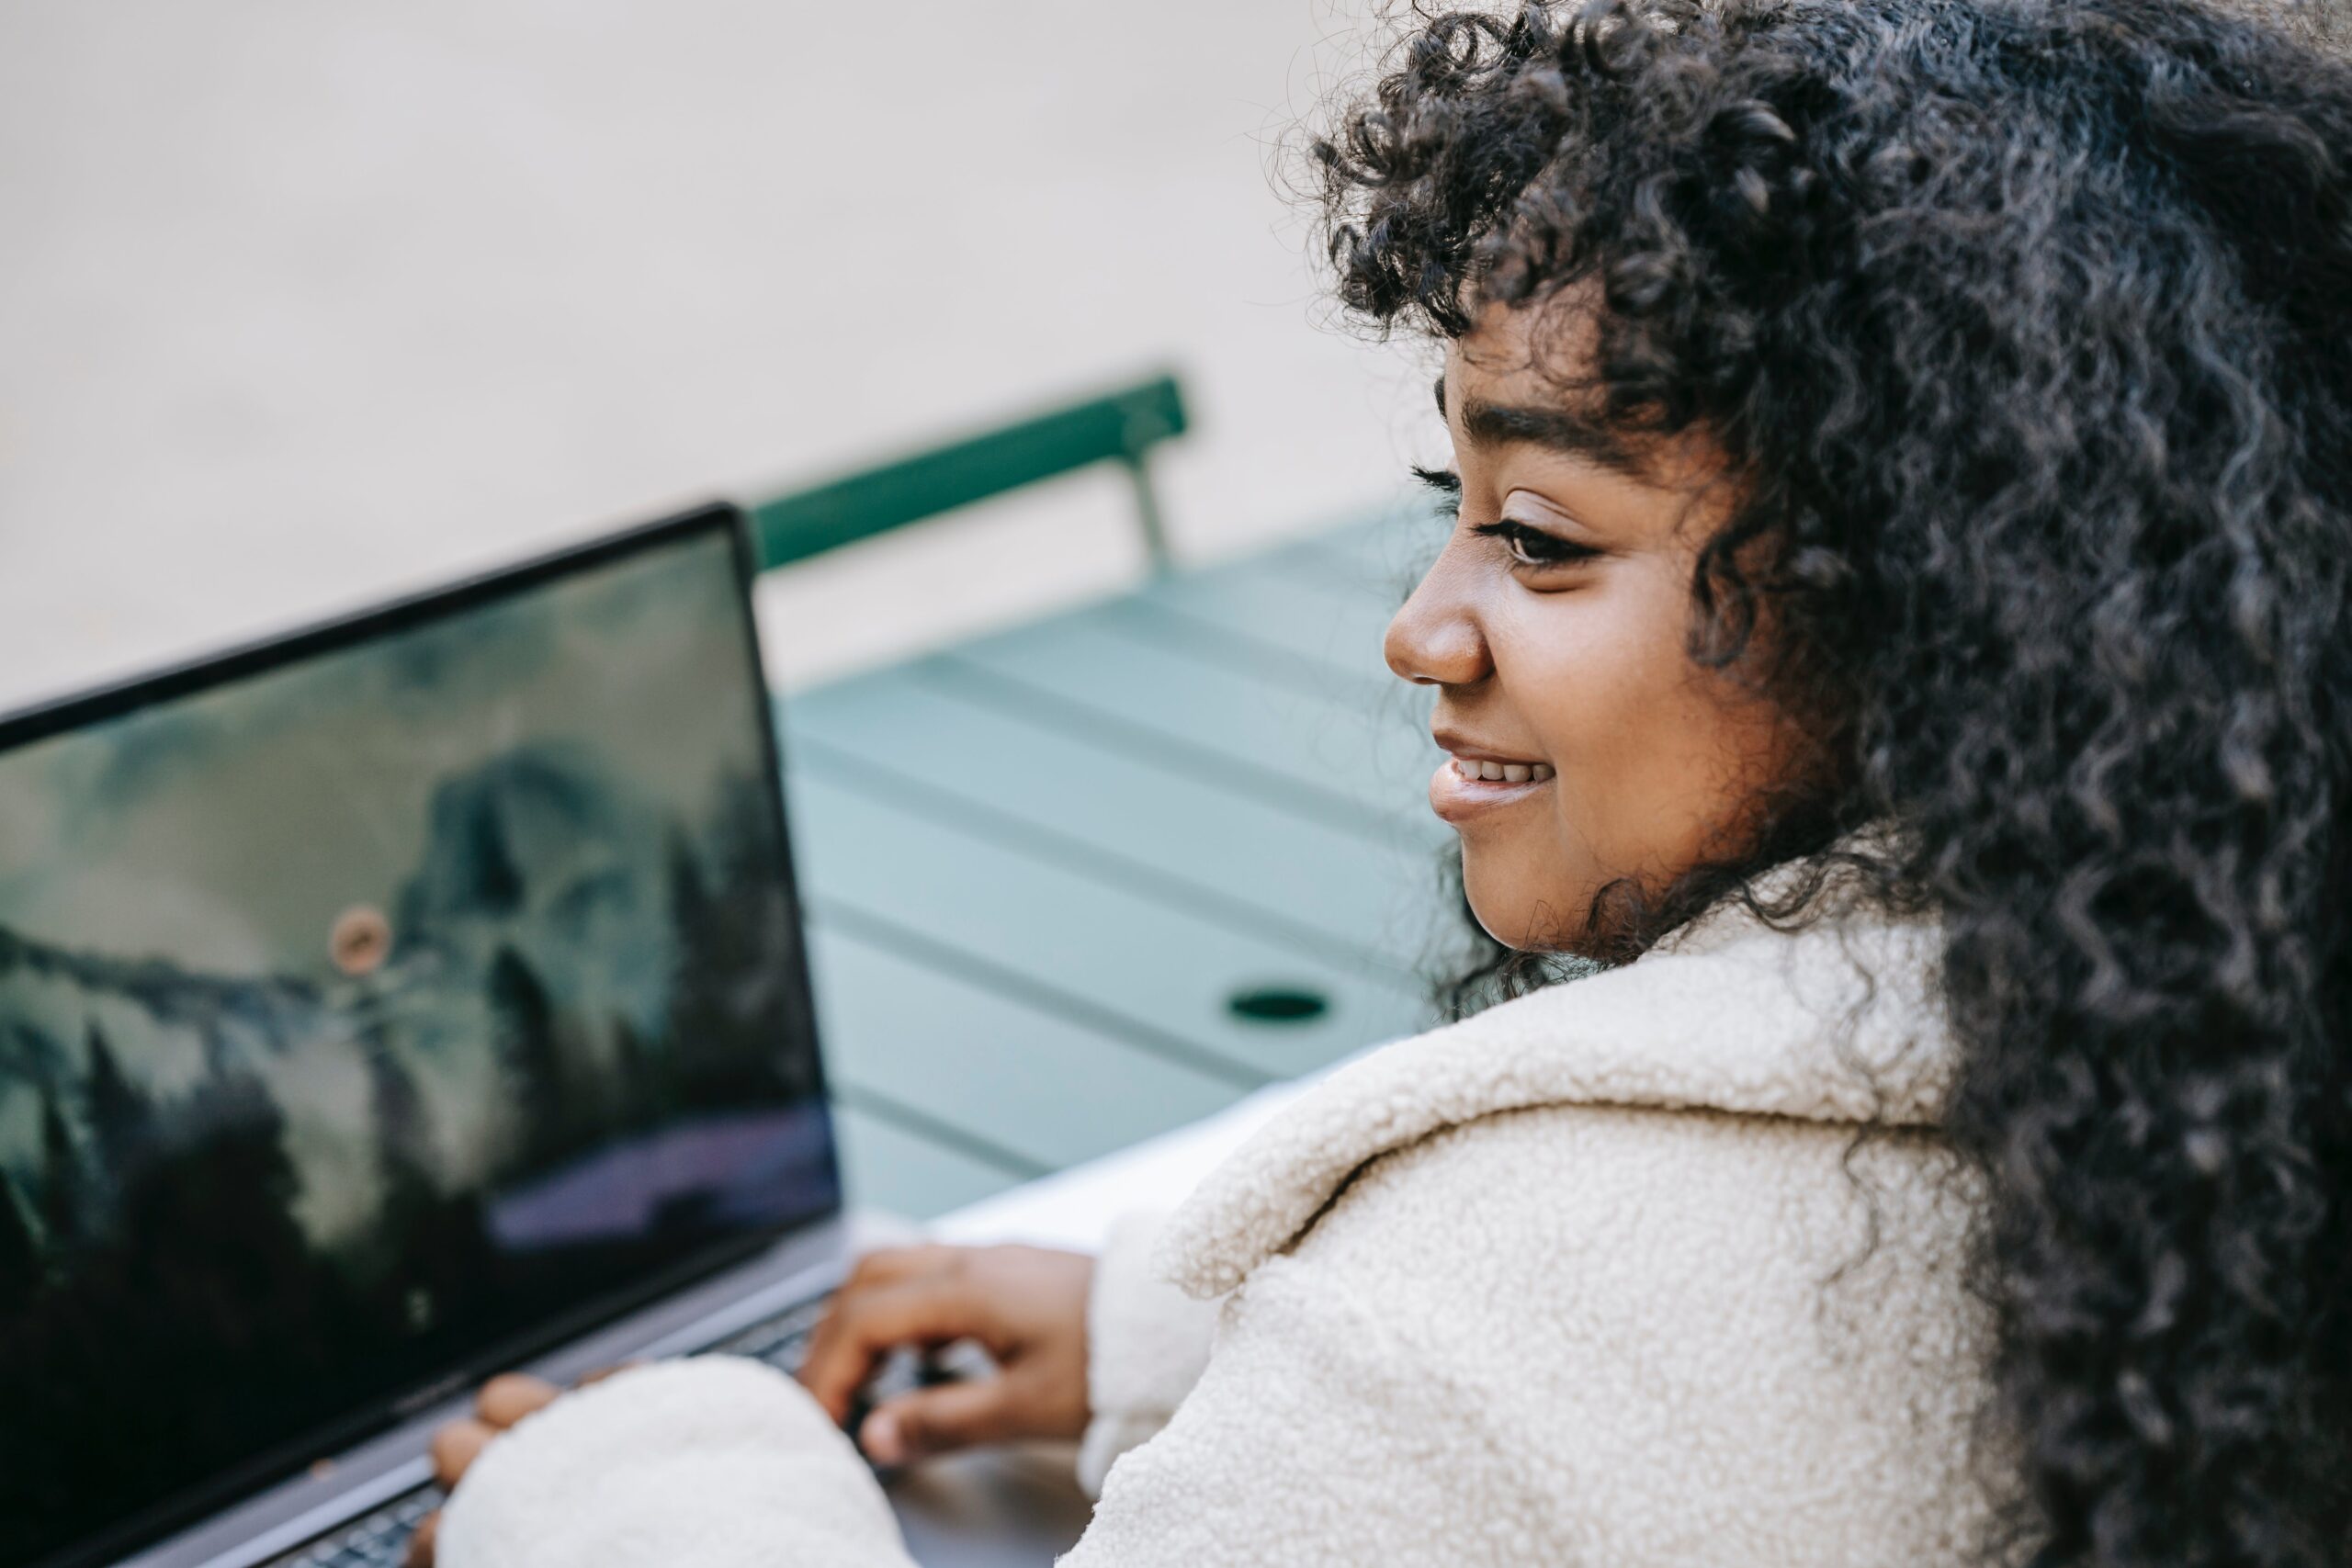 Smiling woman enjoying her SEO success story while working on a laptop outdoors